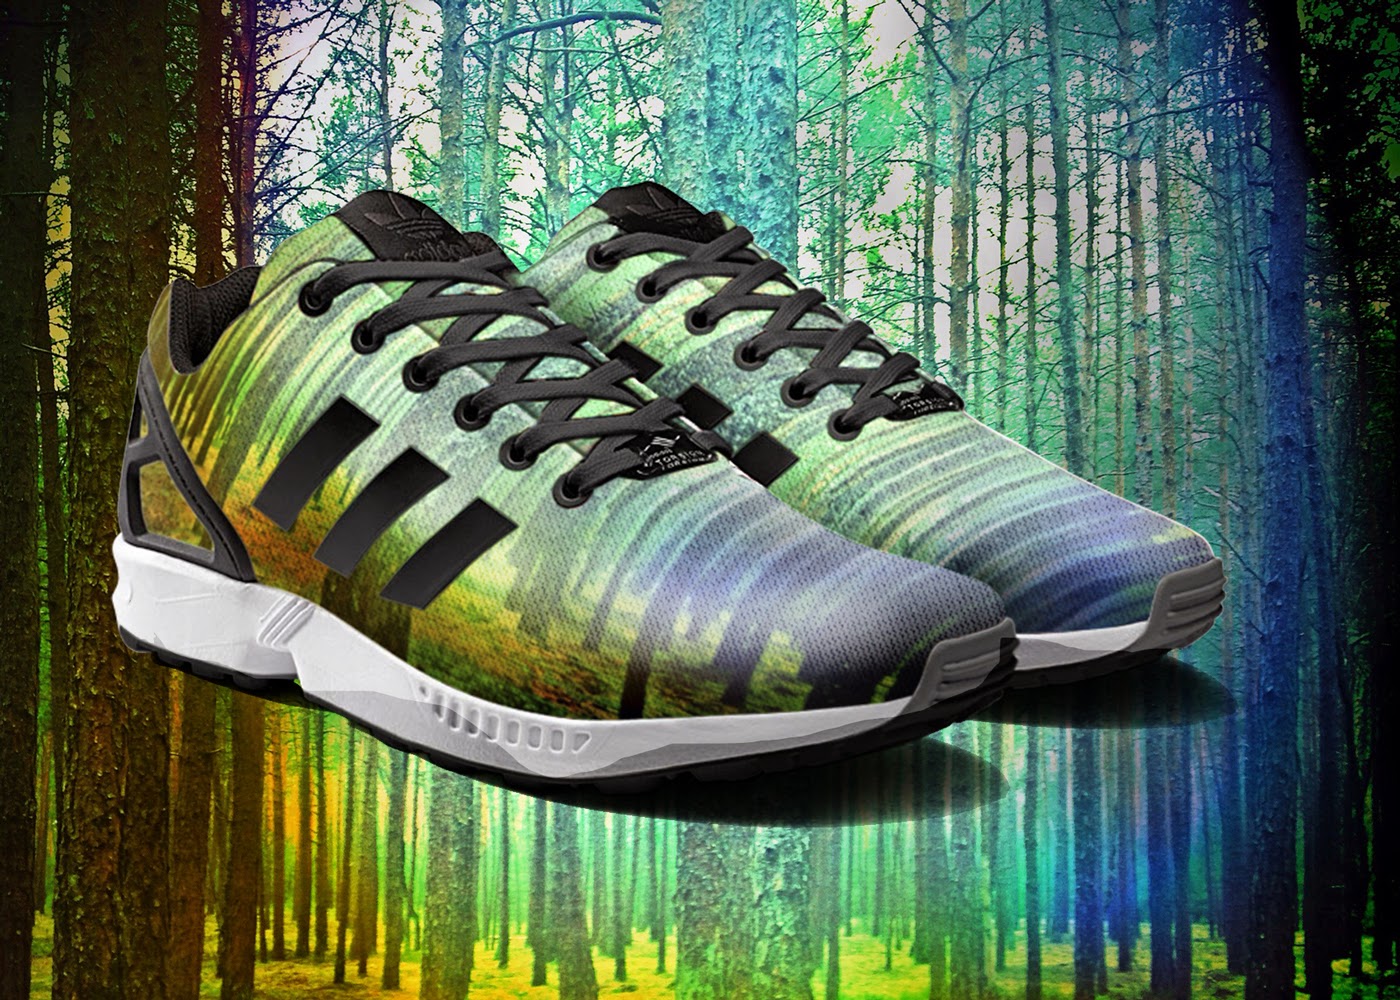 10-mi-Adidas-ZX-Flux-Shoe-App-to-Customise-your-Shoes-www-designstack-co